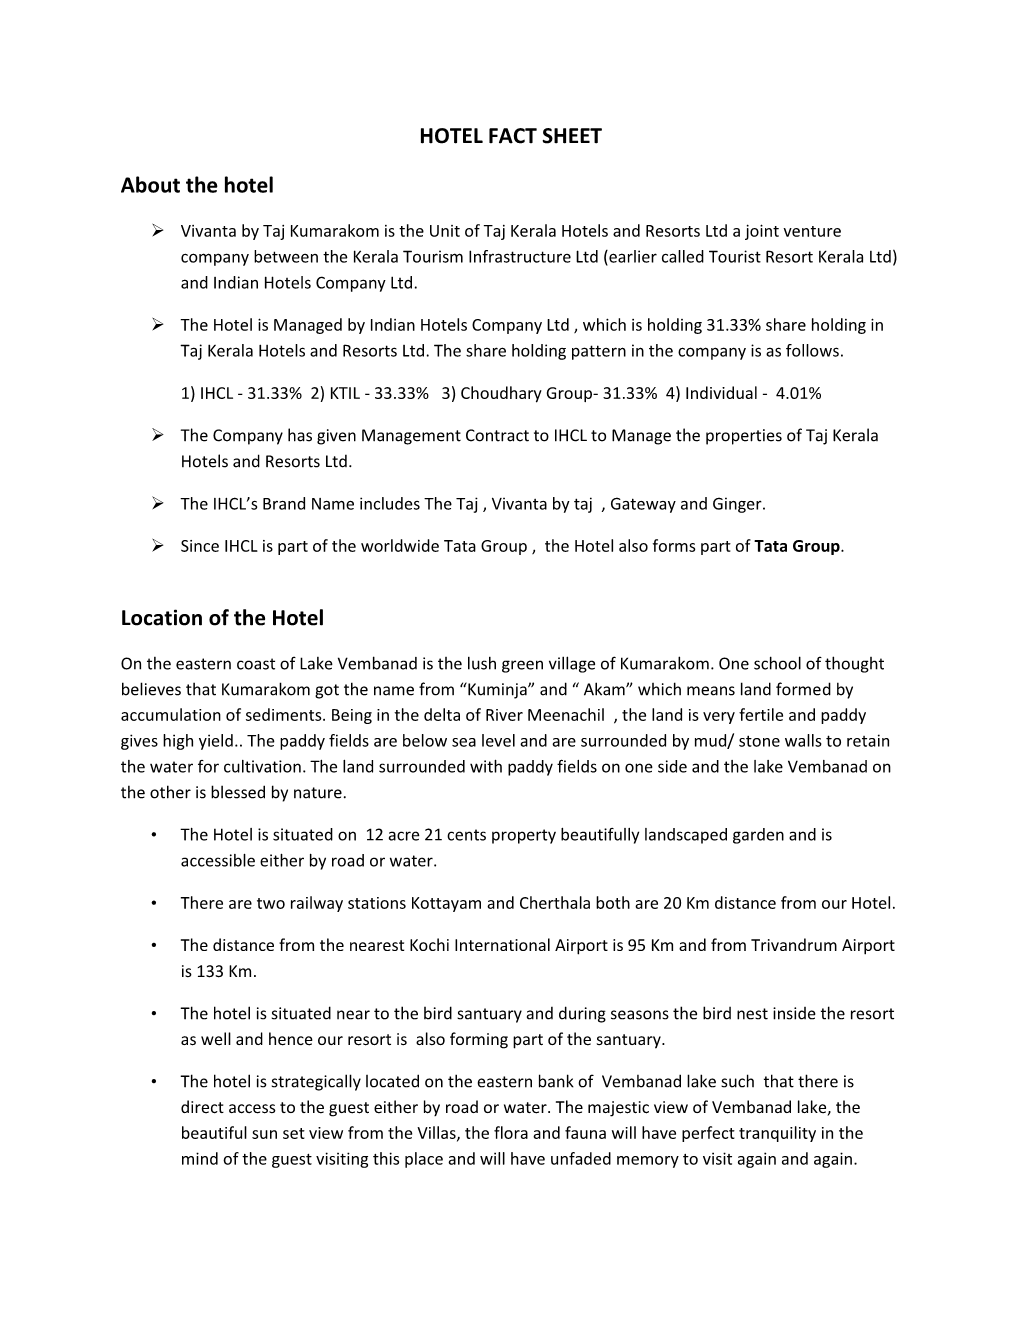 HOTEL FACT SHEET About the Hotel Location of the Hotel